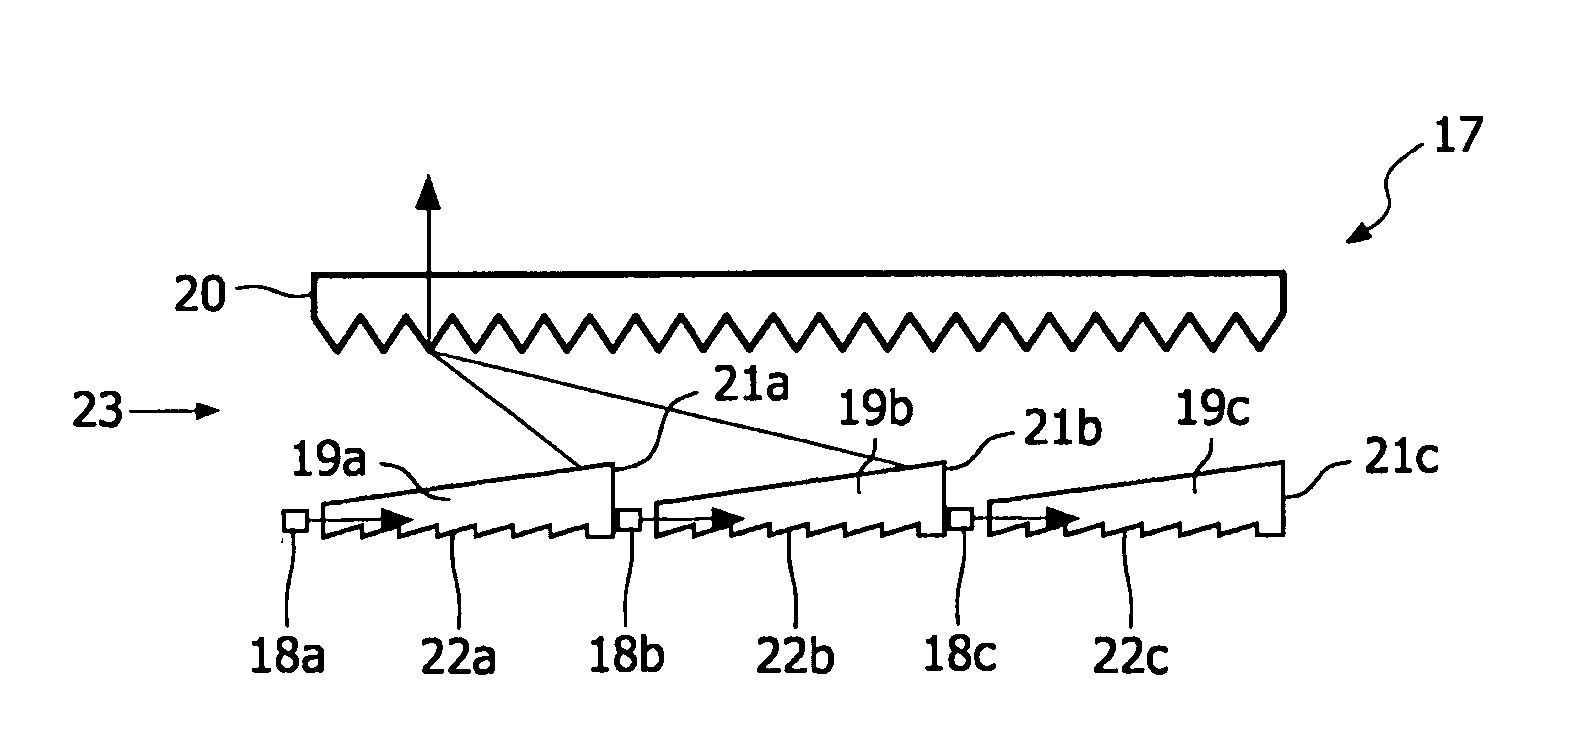 Illumination system for illuminating a display device, and display device